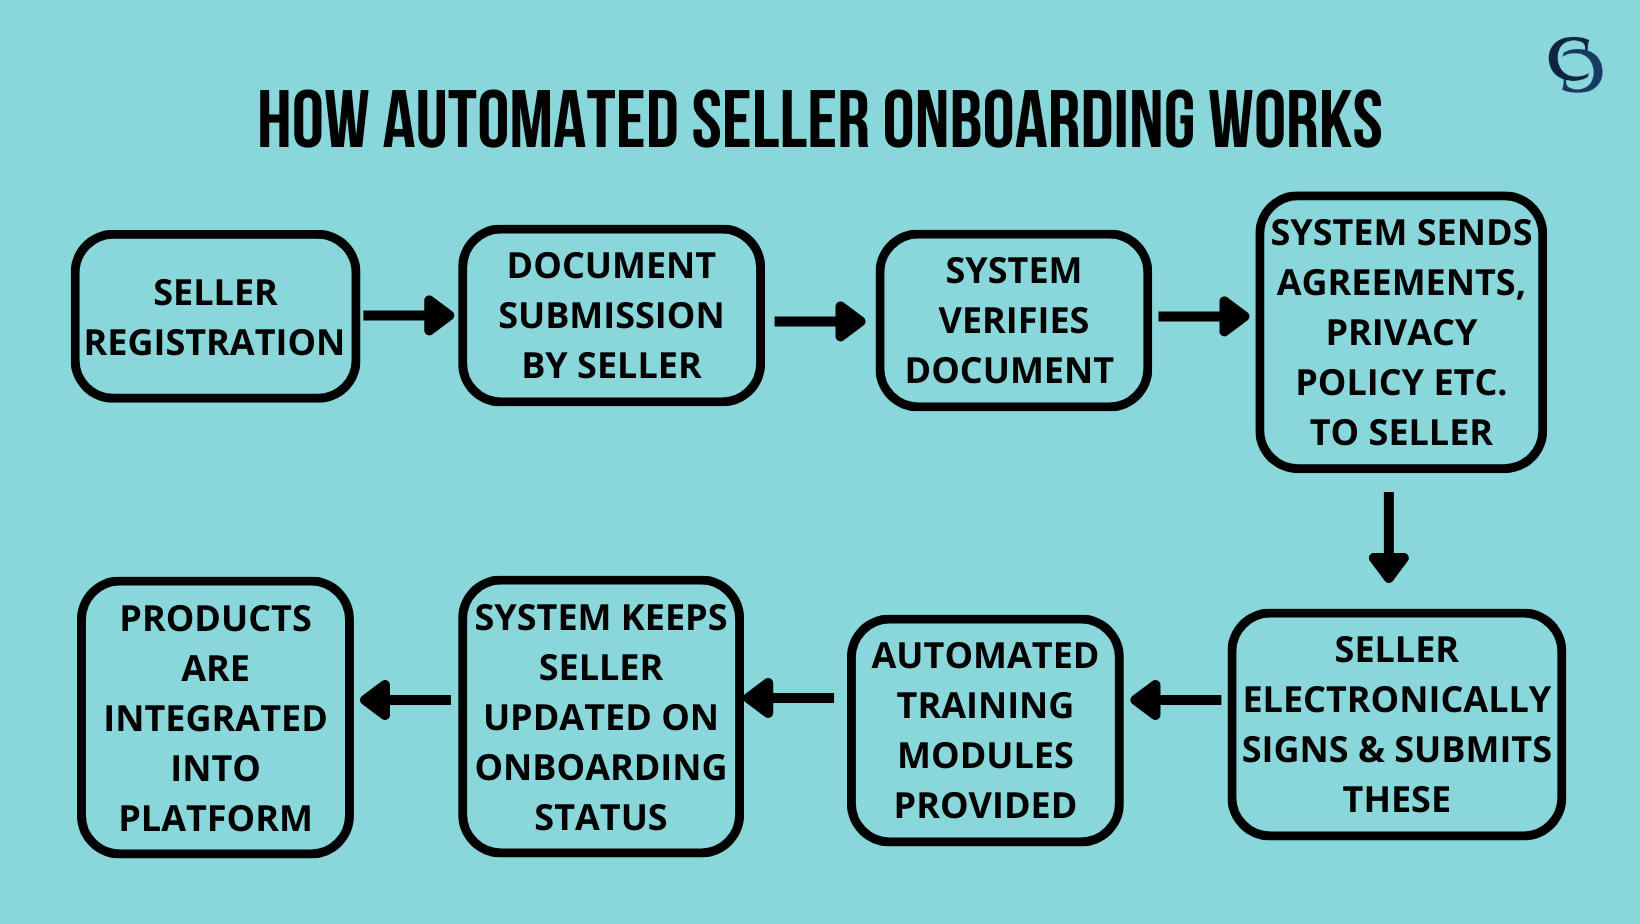 E-commerce Automation in Supplier/Vendor Onboarding - How Automated Seller Onboarding Works